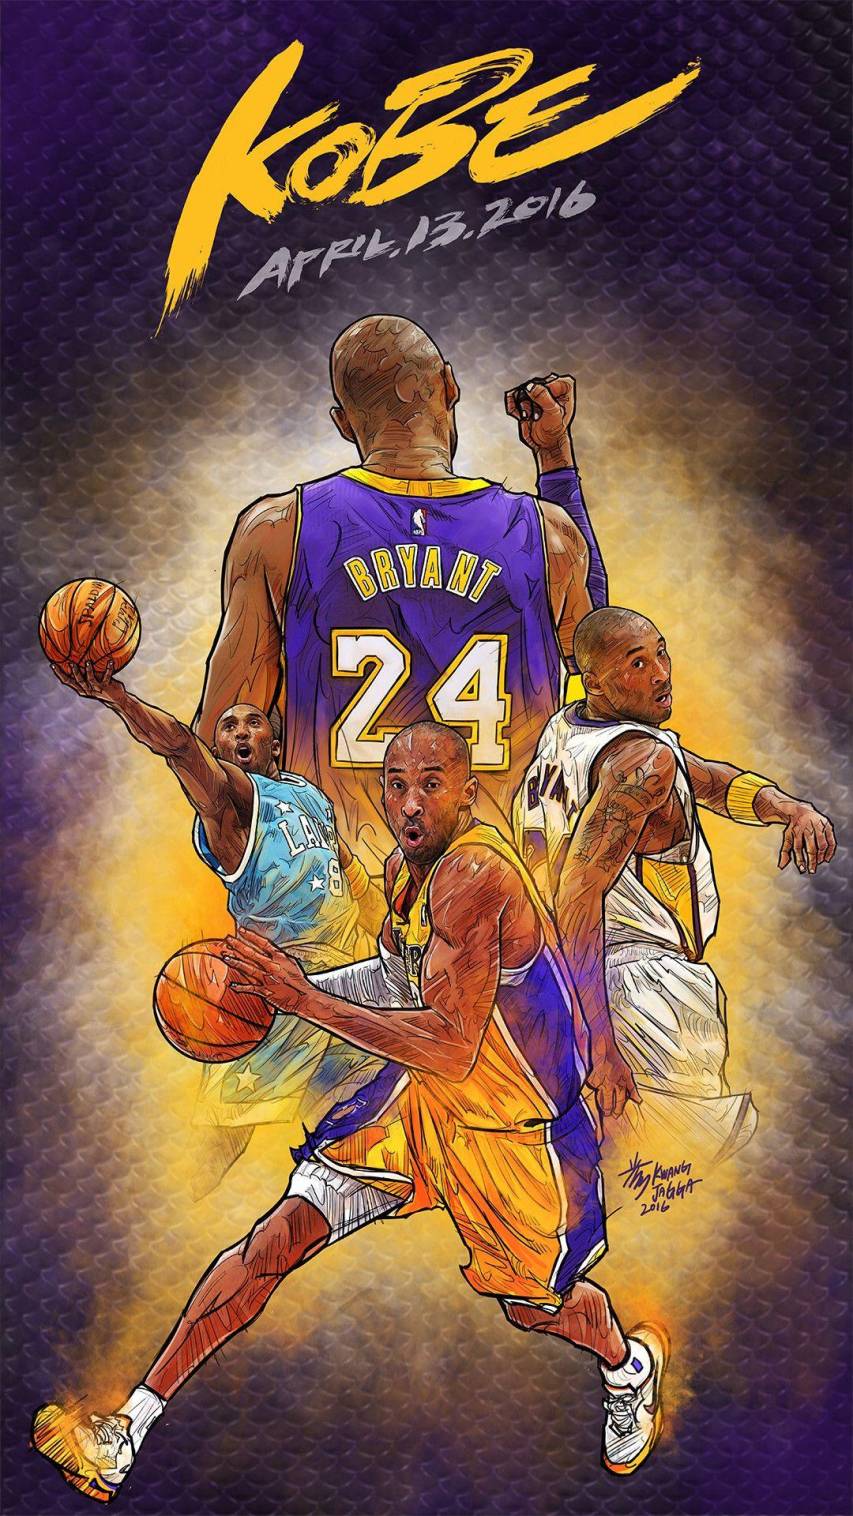 Kobe Bryant wallpaper for iPhone and Android devices. - Kobe Bryant